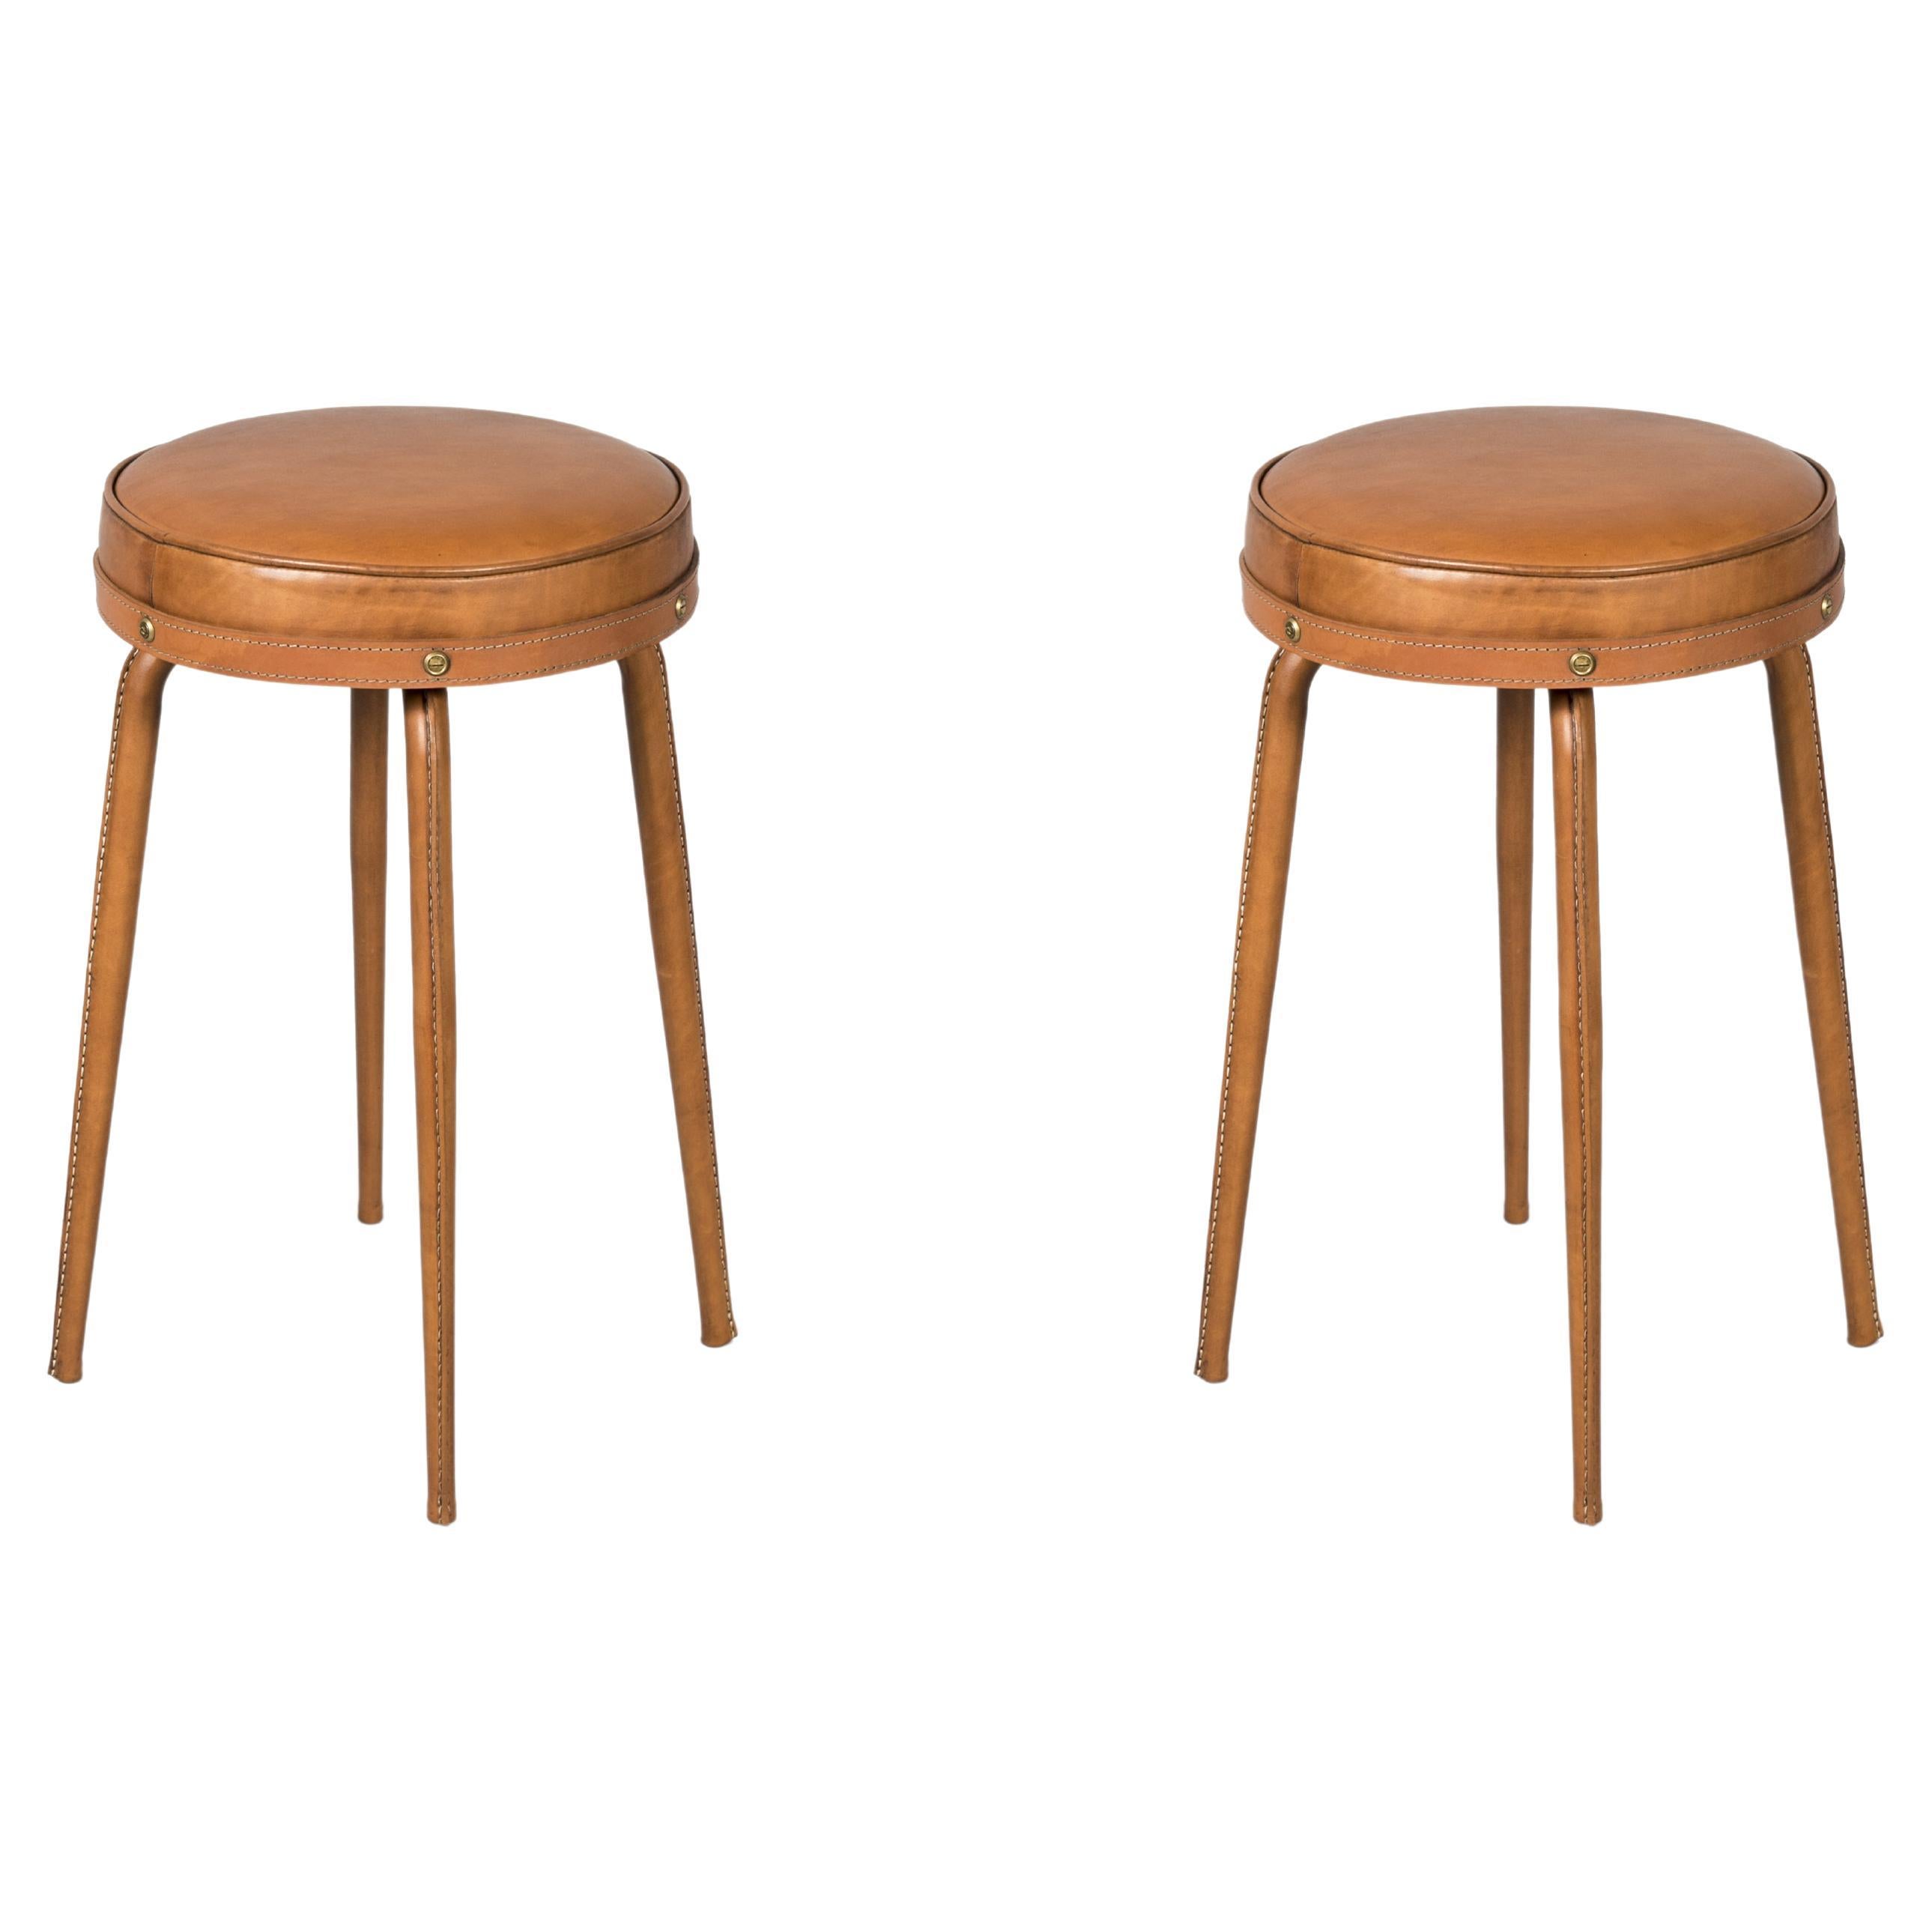 Pair of 1950's Stitched Leather Stools by Jacques Adnet